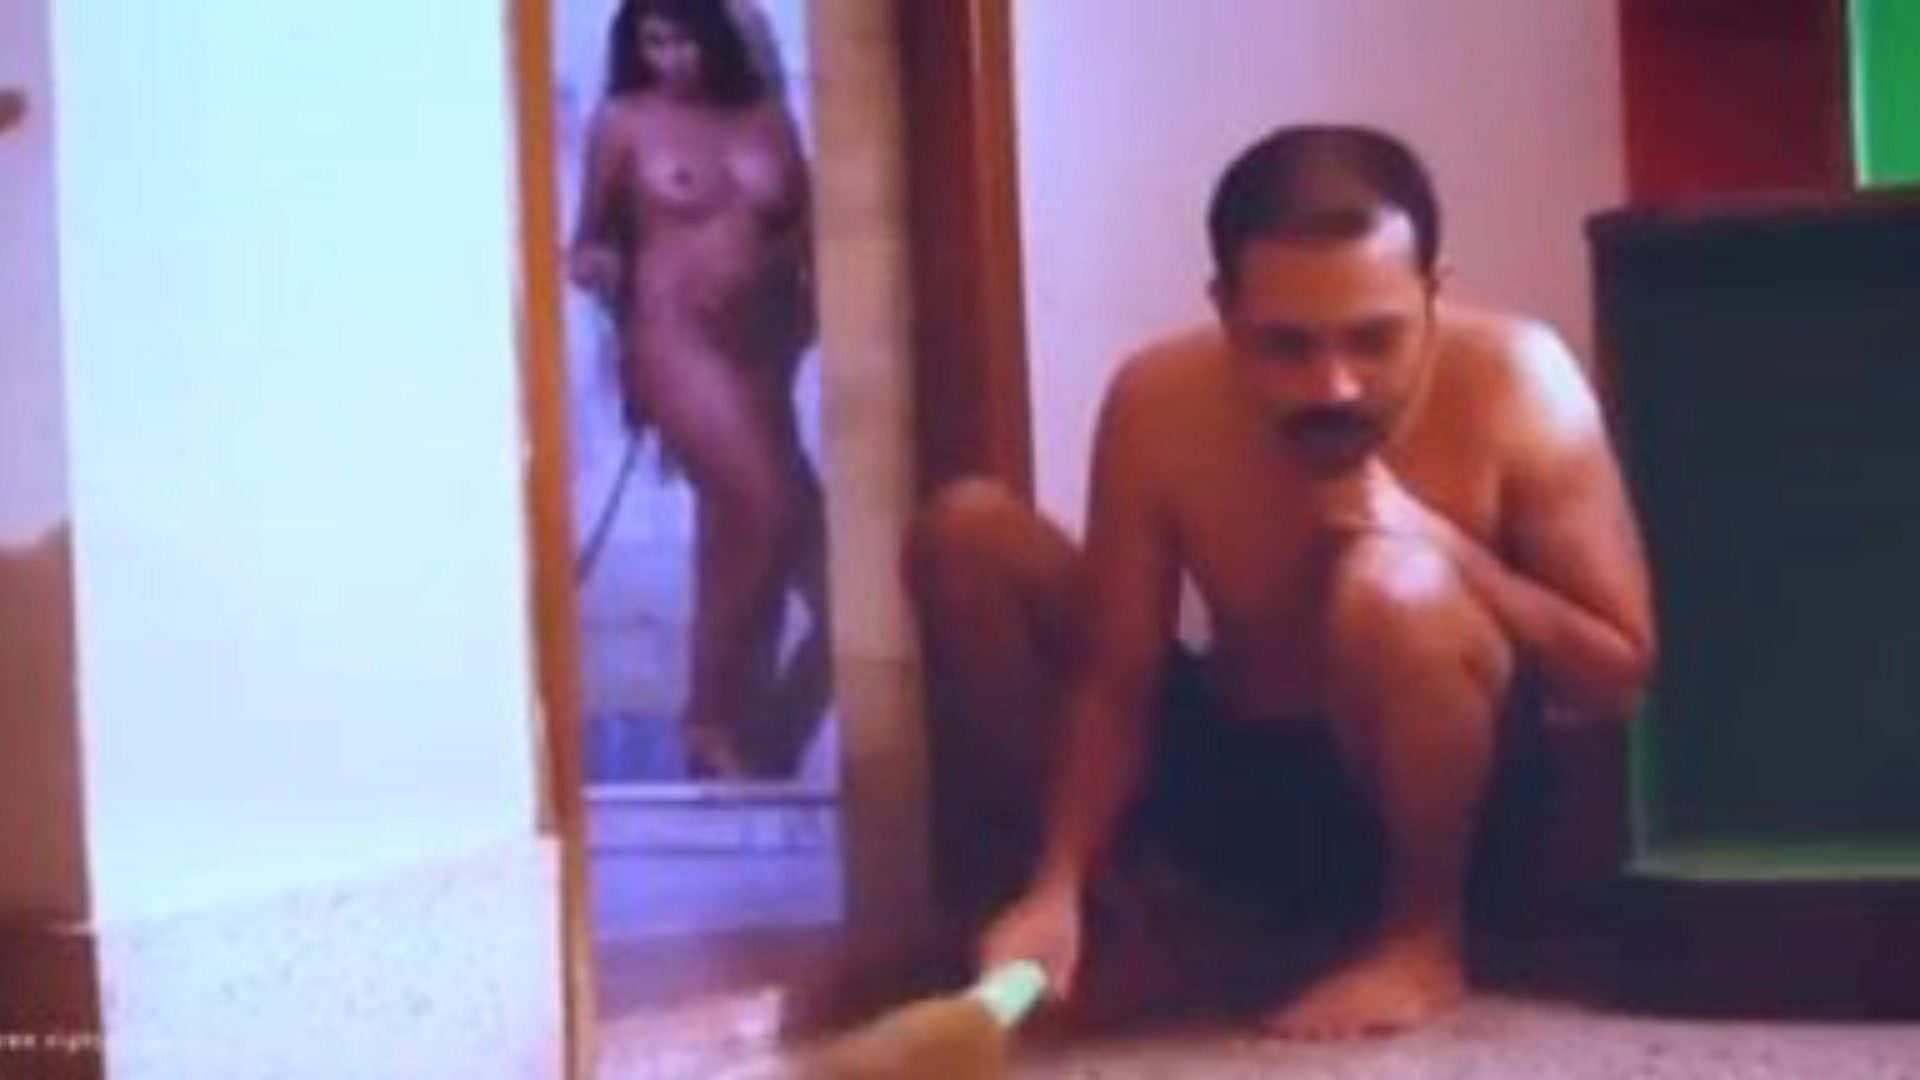 House Owner Threatens to Fuck the Maid Servant: Porn 86 Watch House Owner Threatens to Fuck the Maid Servant video on xHamster - the ultimate archive of free-for-all Indian Free Fuck Tube hardcore porn tube movies